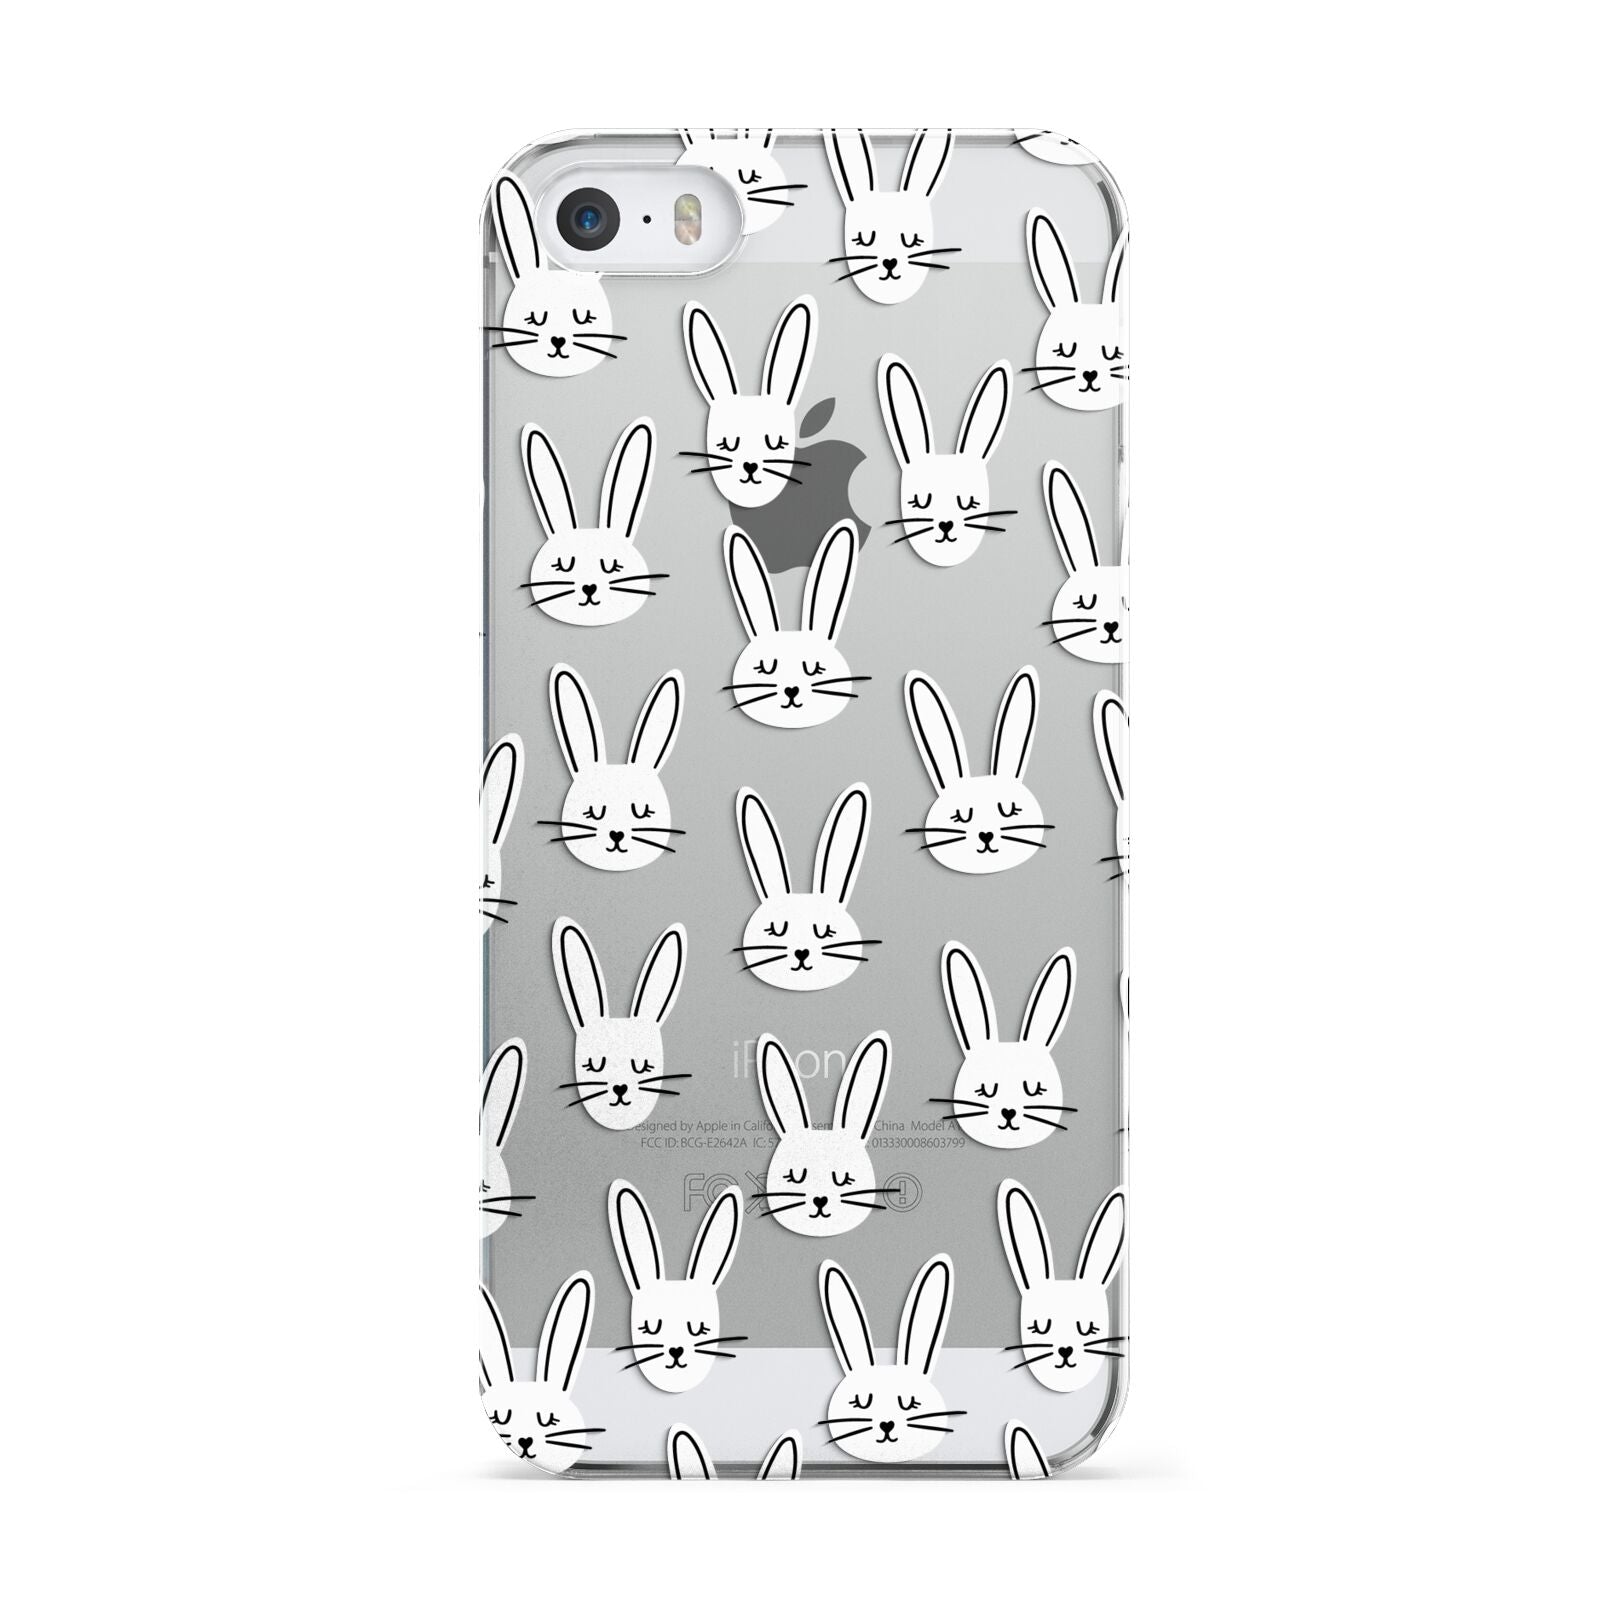 Easter Bunny Apple iPhone 5 Case